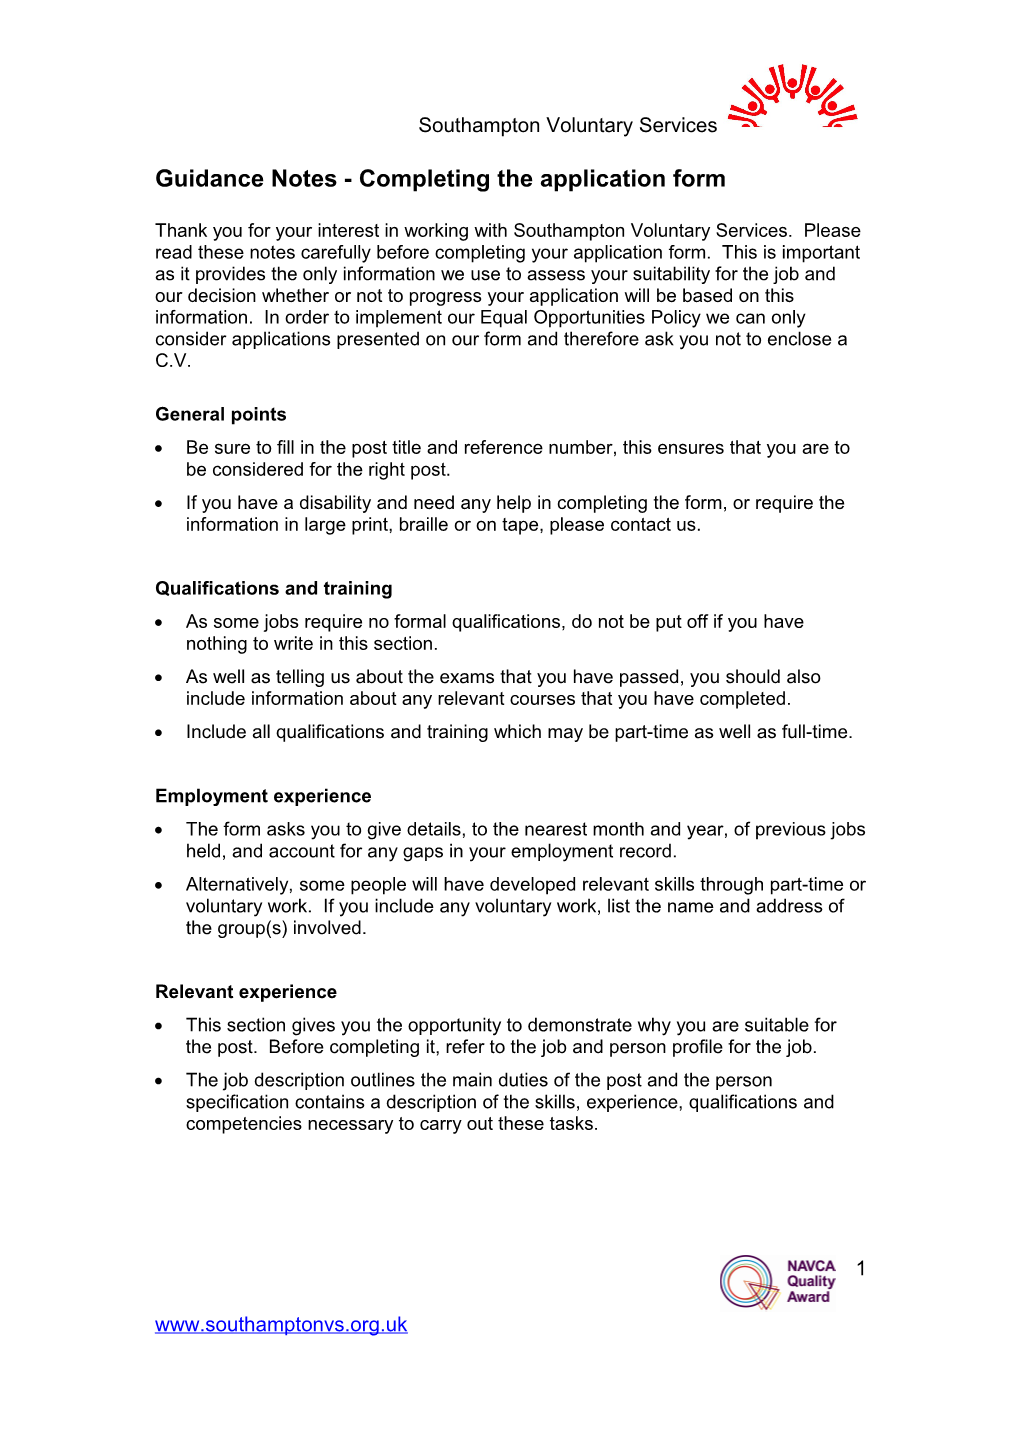 Guidance Notes - Completing the Application Form